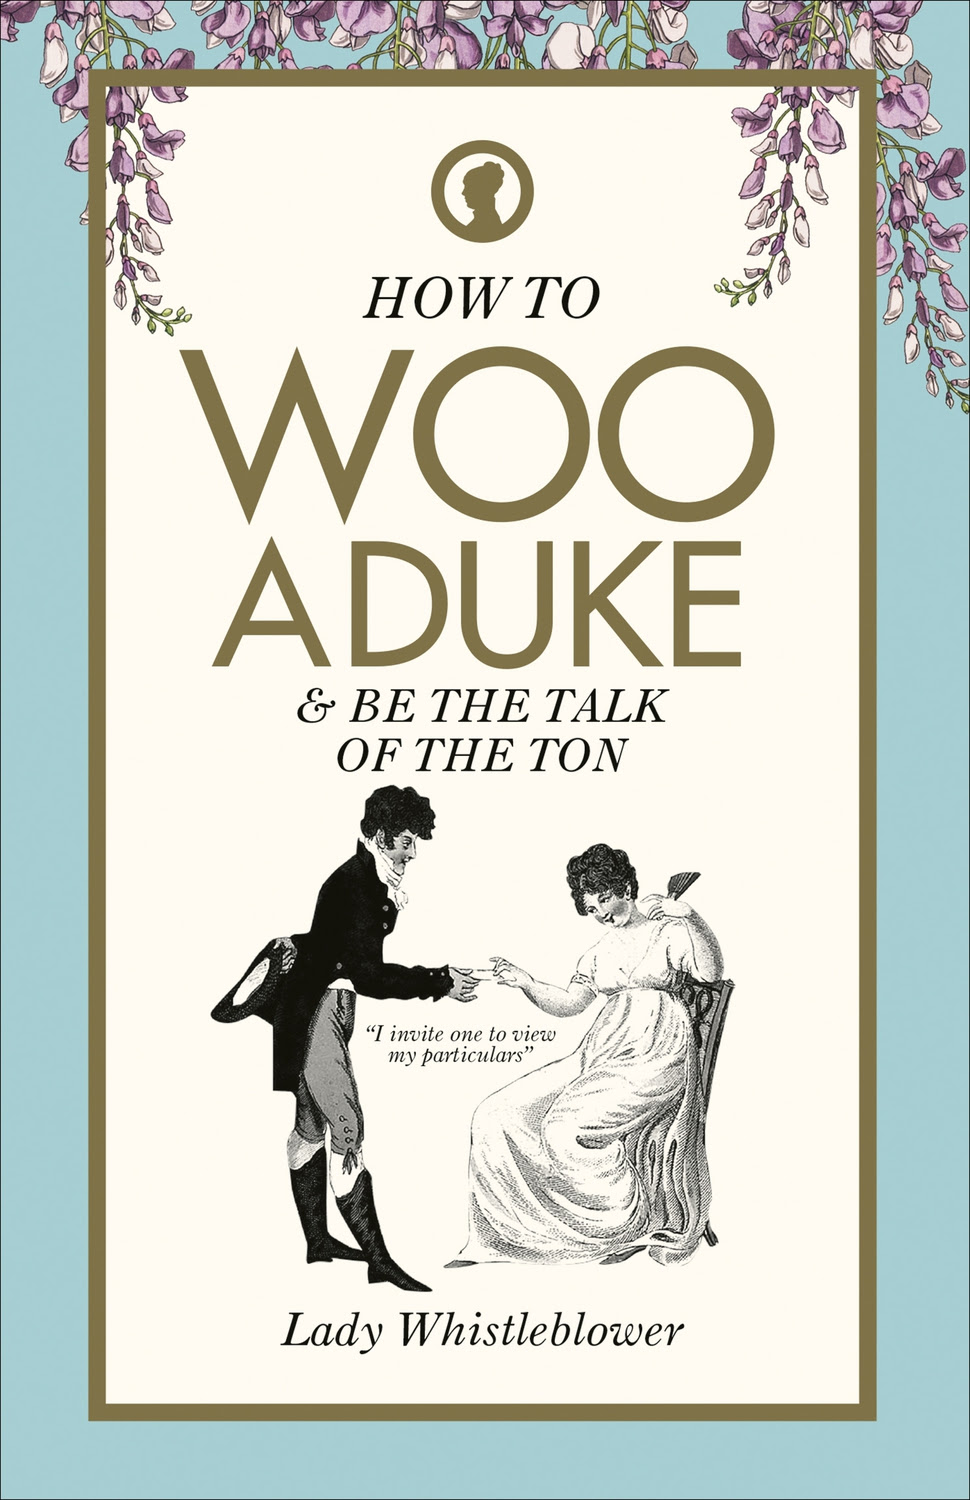 How to Woo a Duke: be the talk of the ton PDF